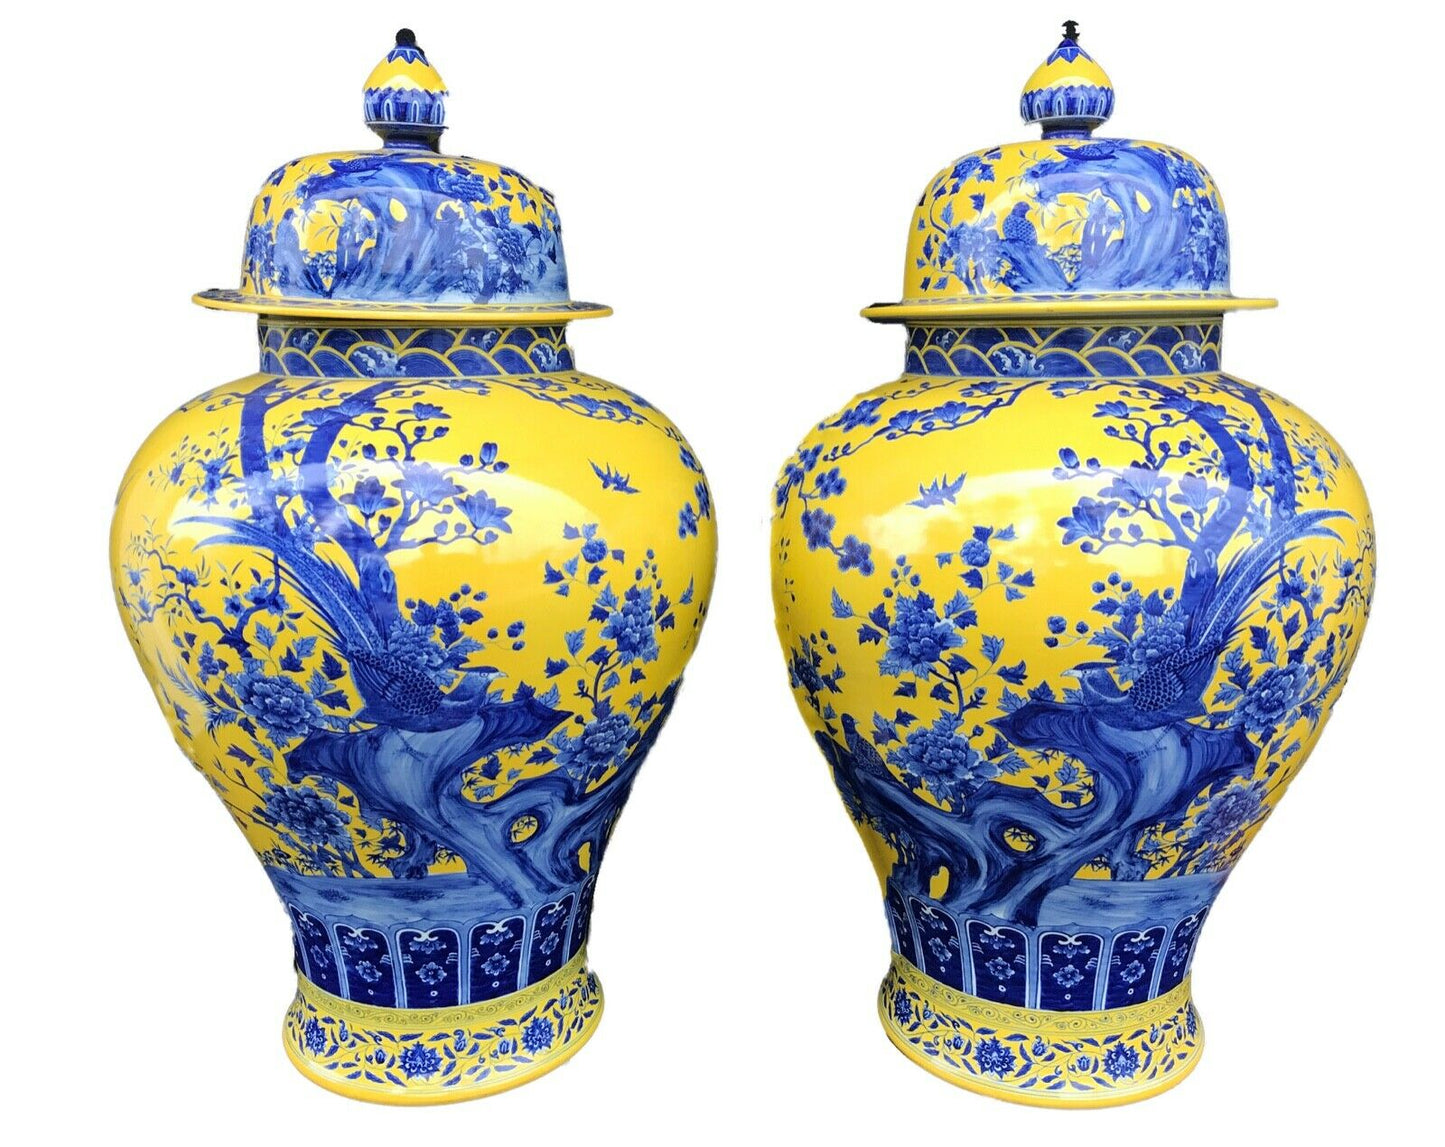 #2367 Museum Quality Lg Chinese Famille Jaune Ginger Jars - a Pair 30.75" H by 17.5" D